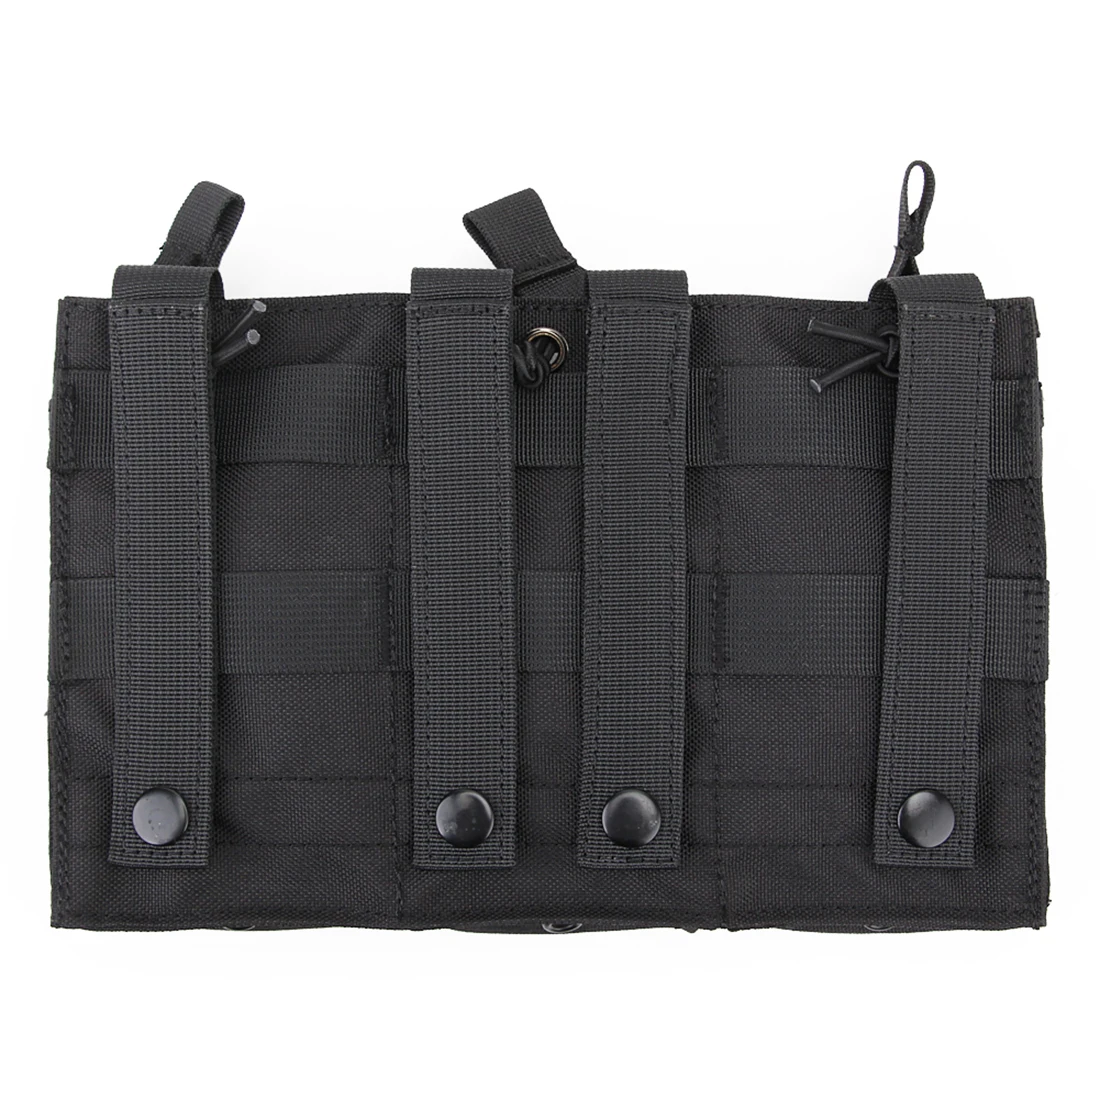 Tactical triple magazine pouch for